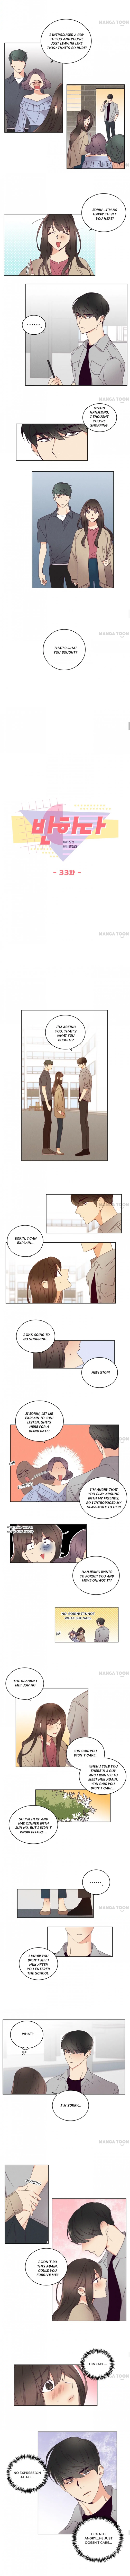 Love At First Sight - Page 2